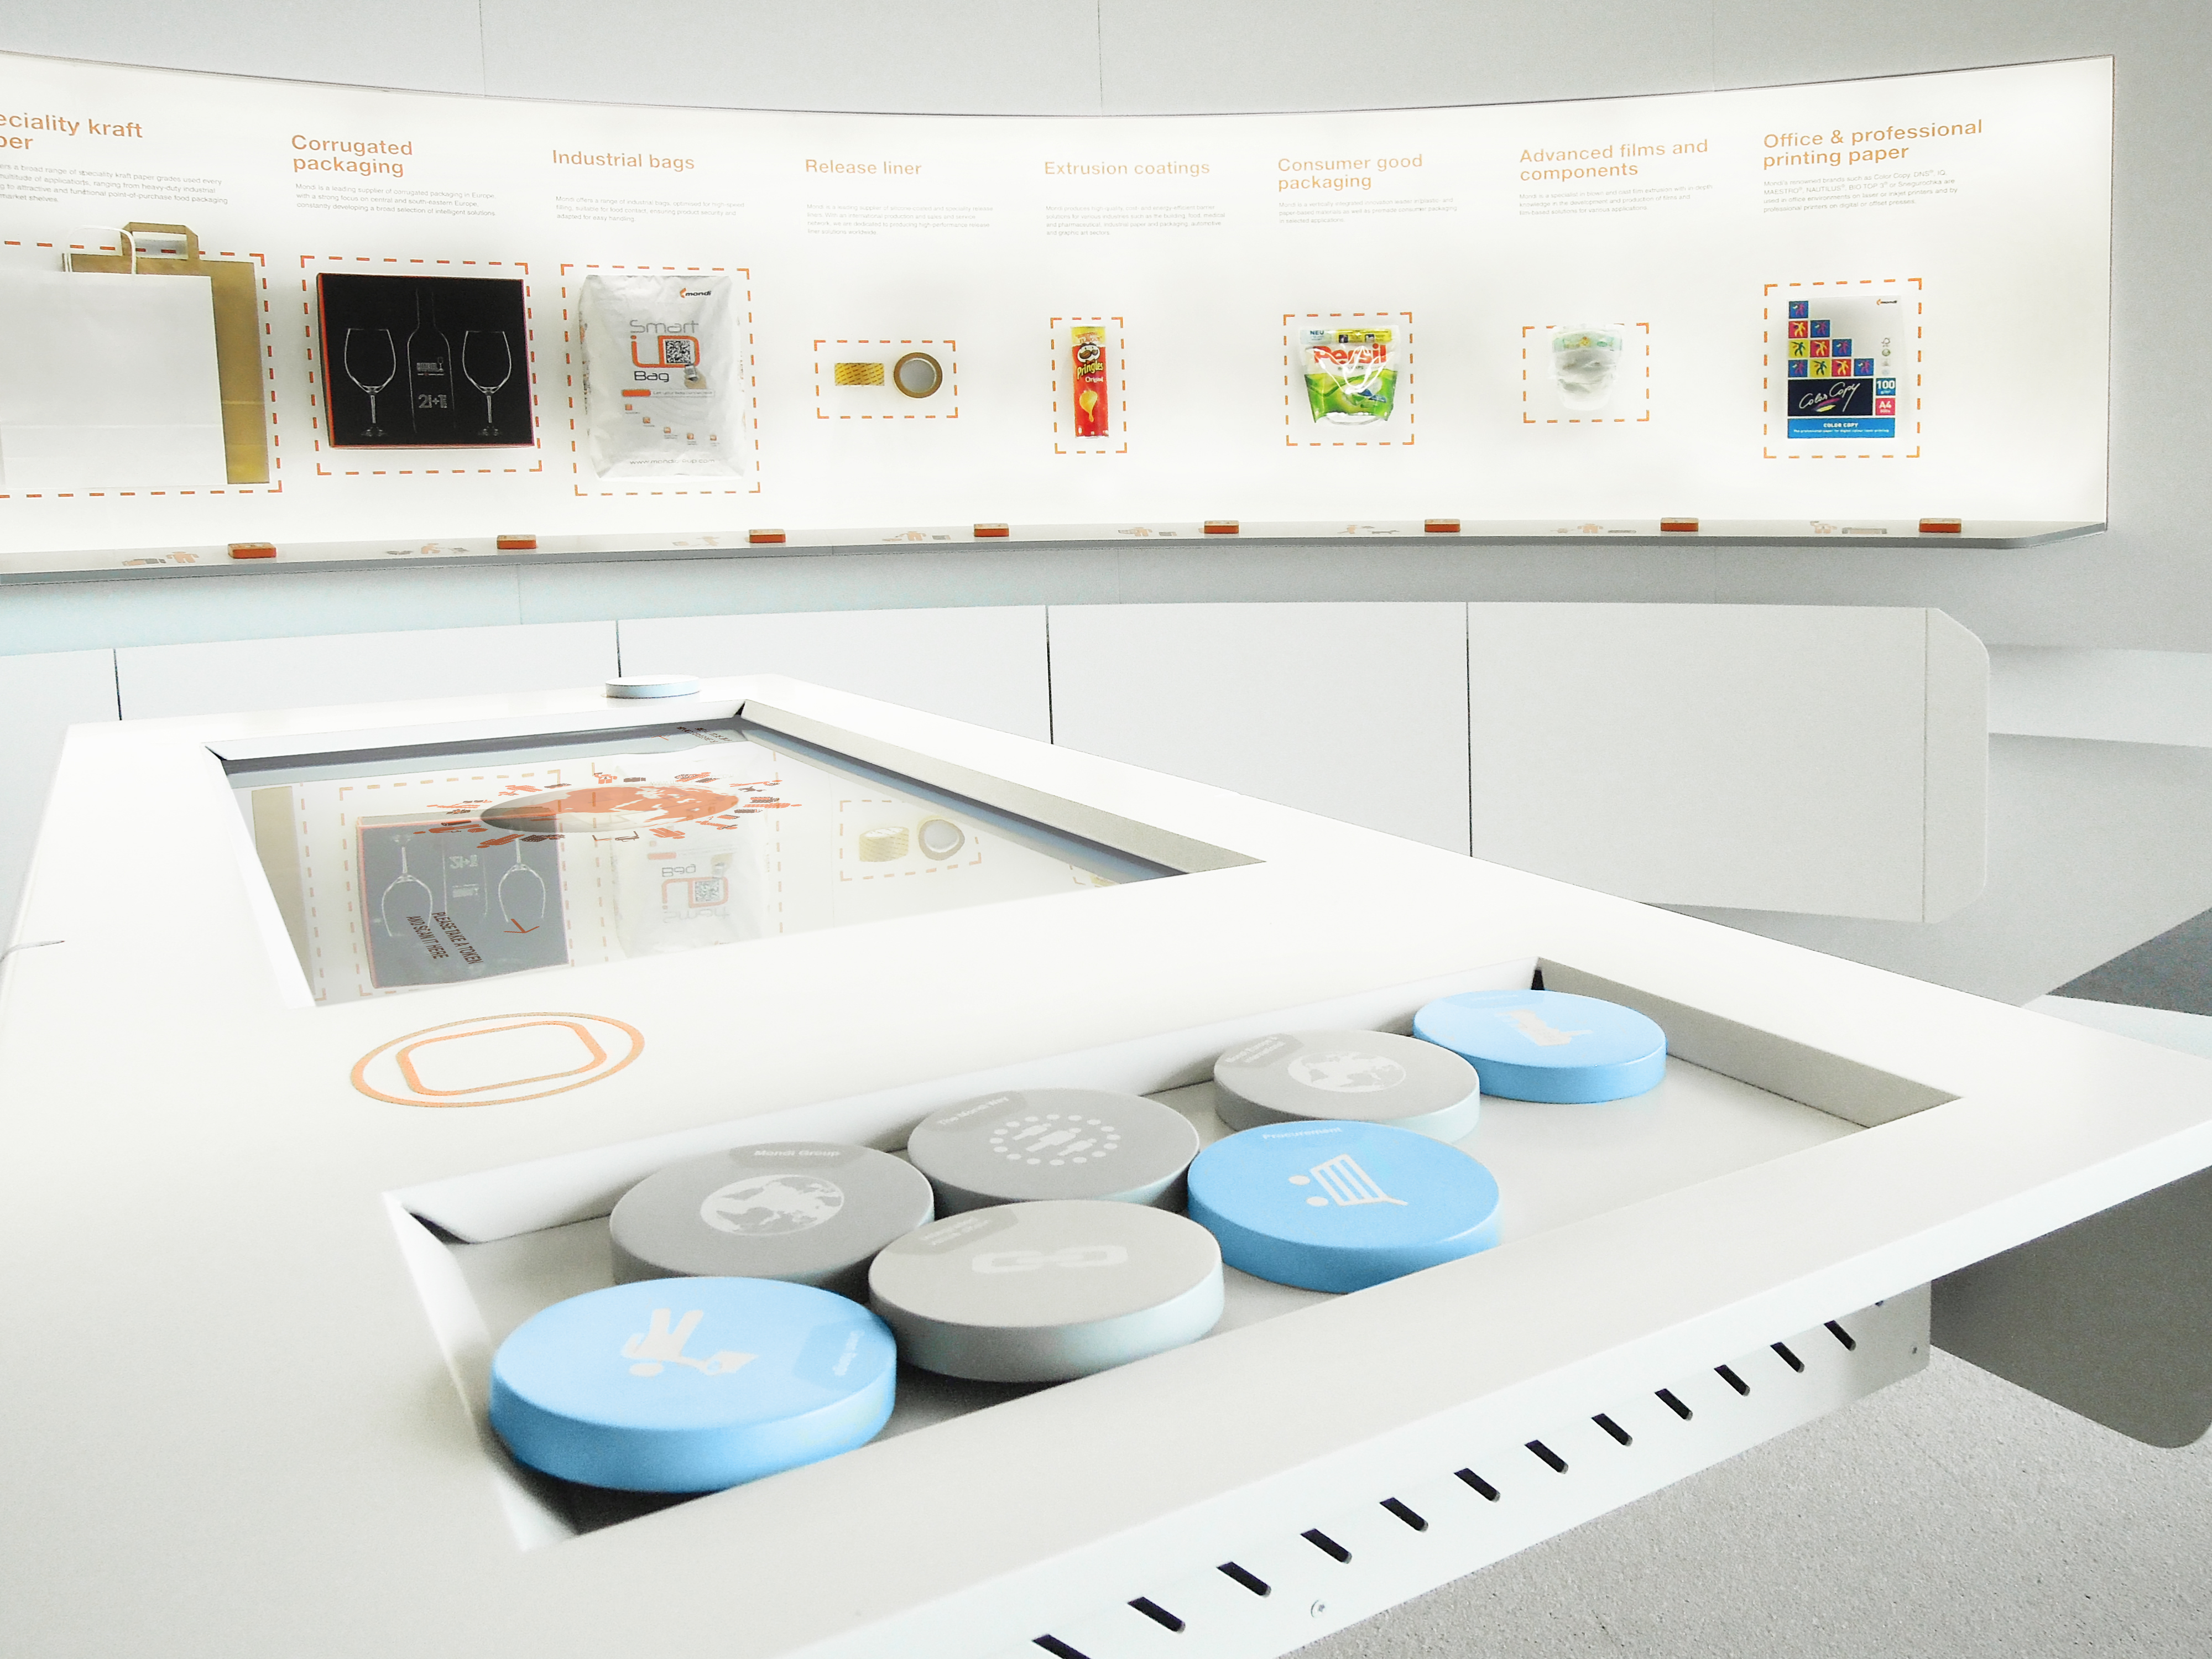 Mondi product samples and interactive table with various themed tokens